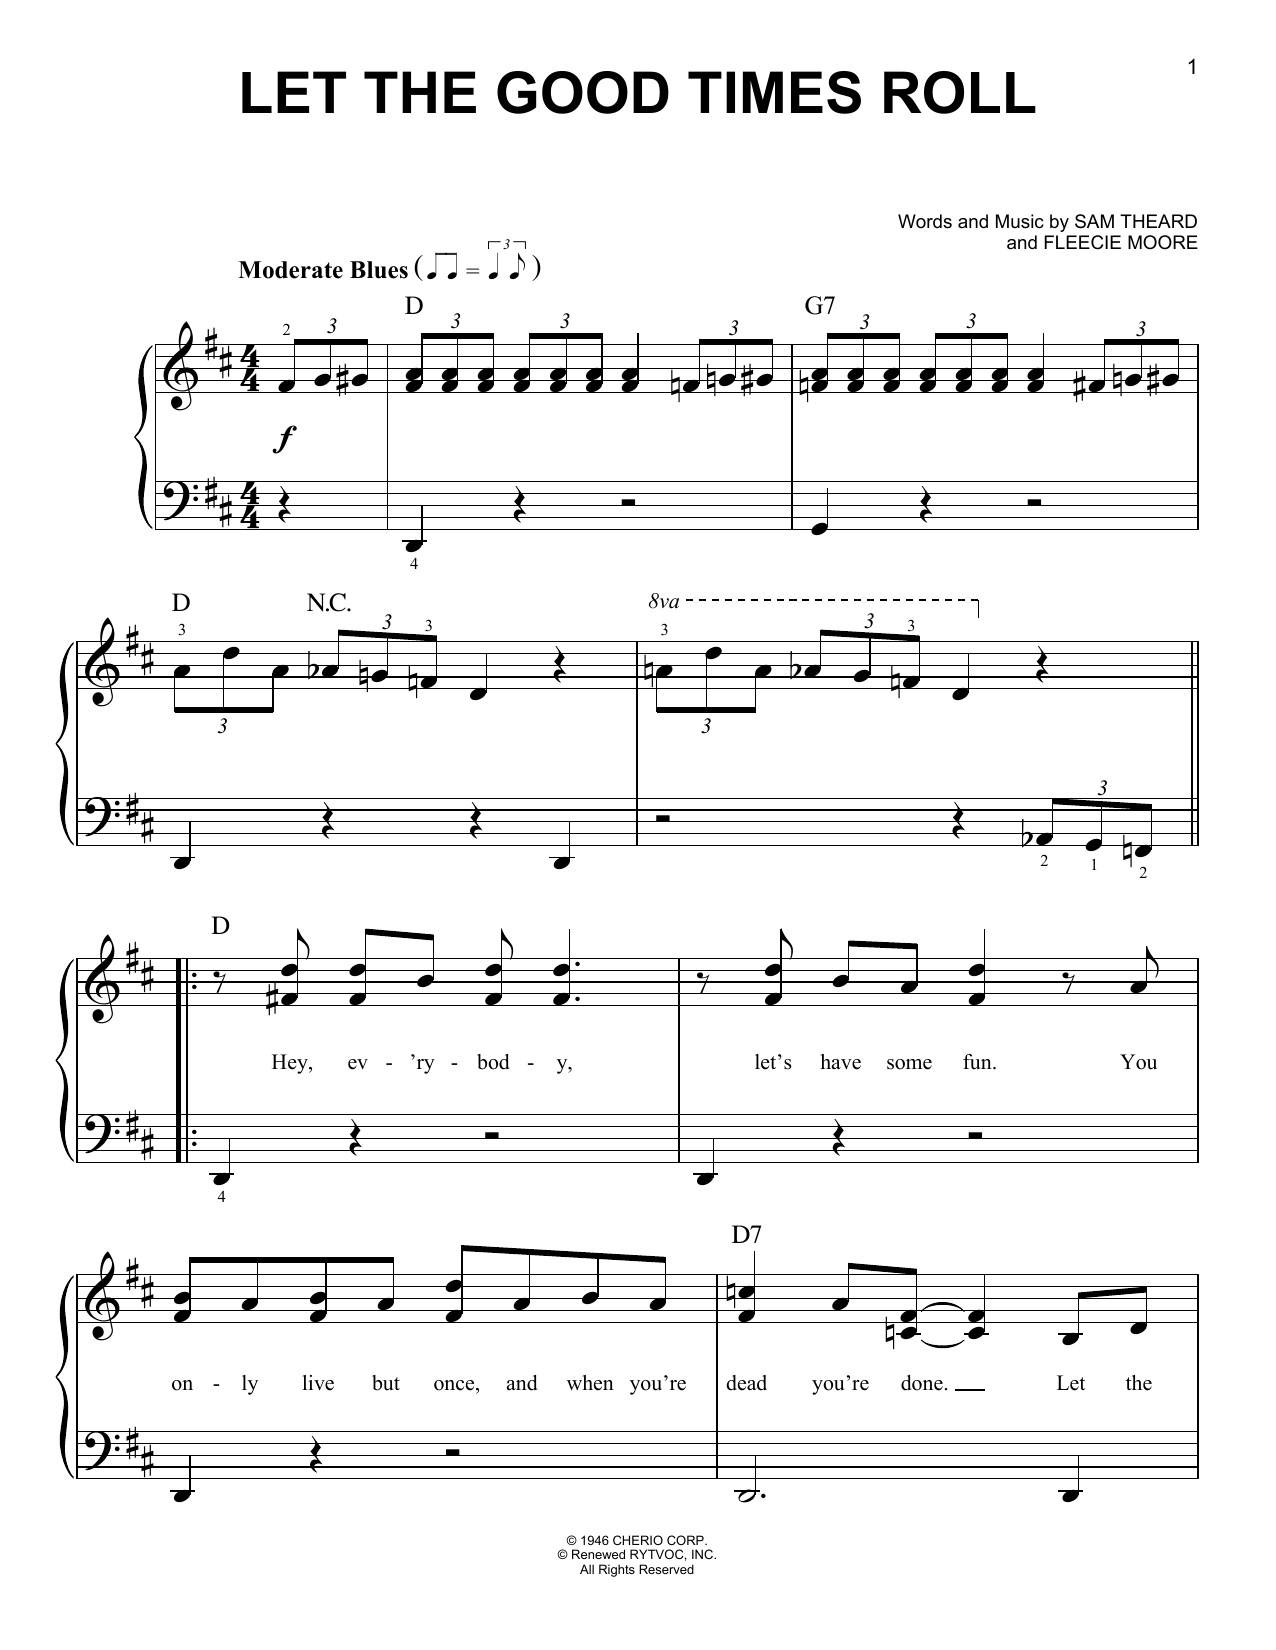 Download B.B. King Let The Good Times Roll Sheet Music